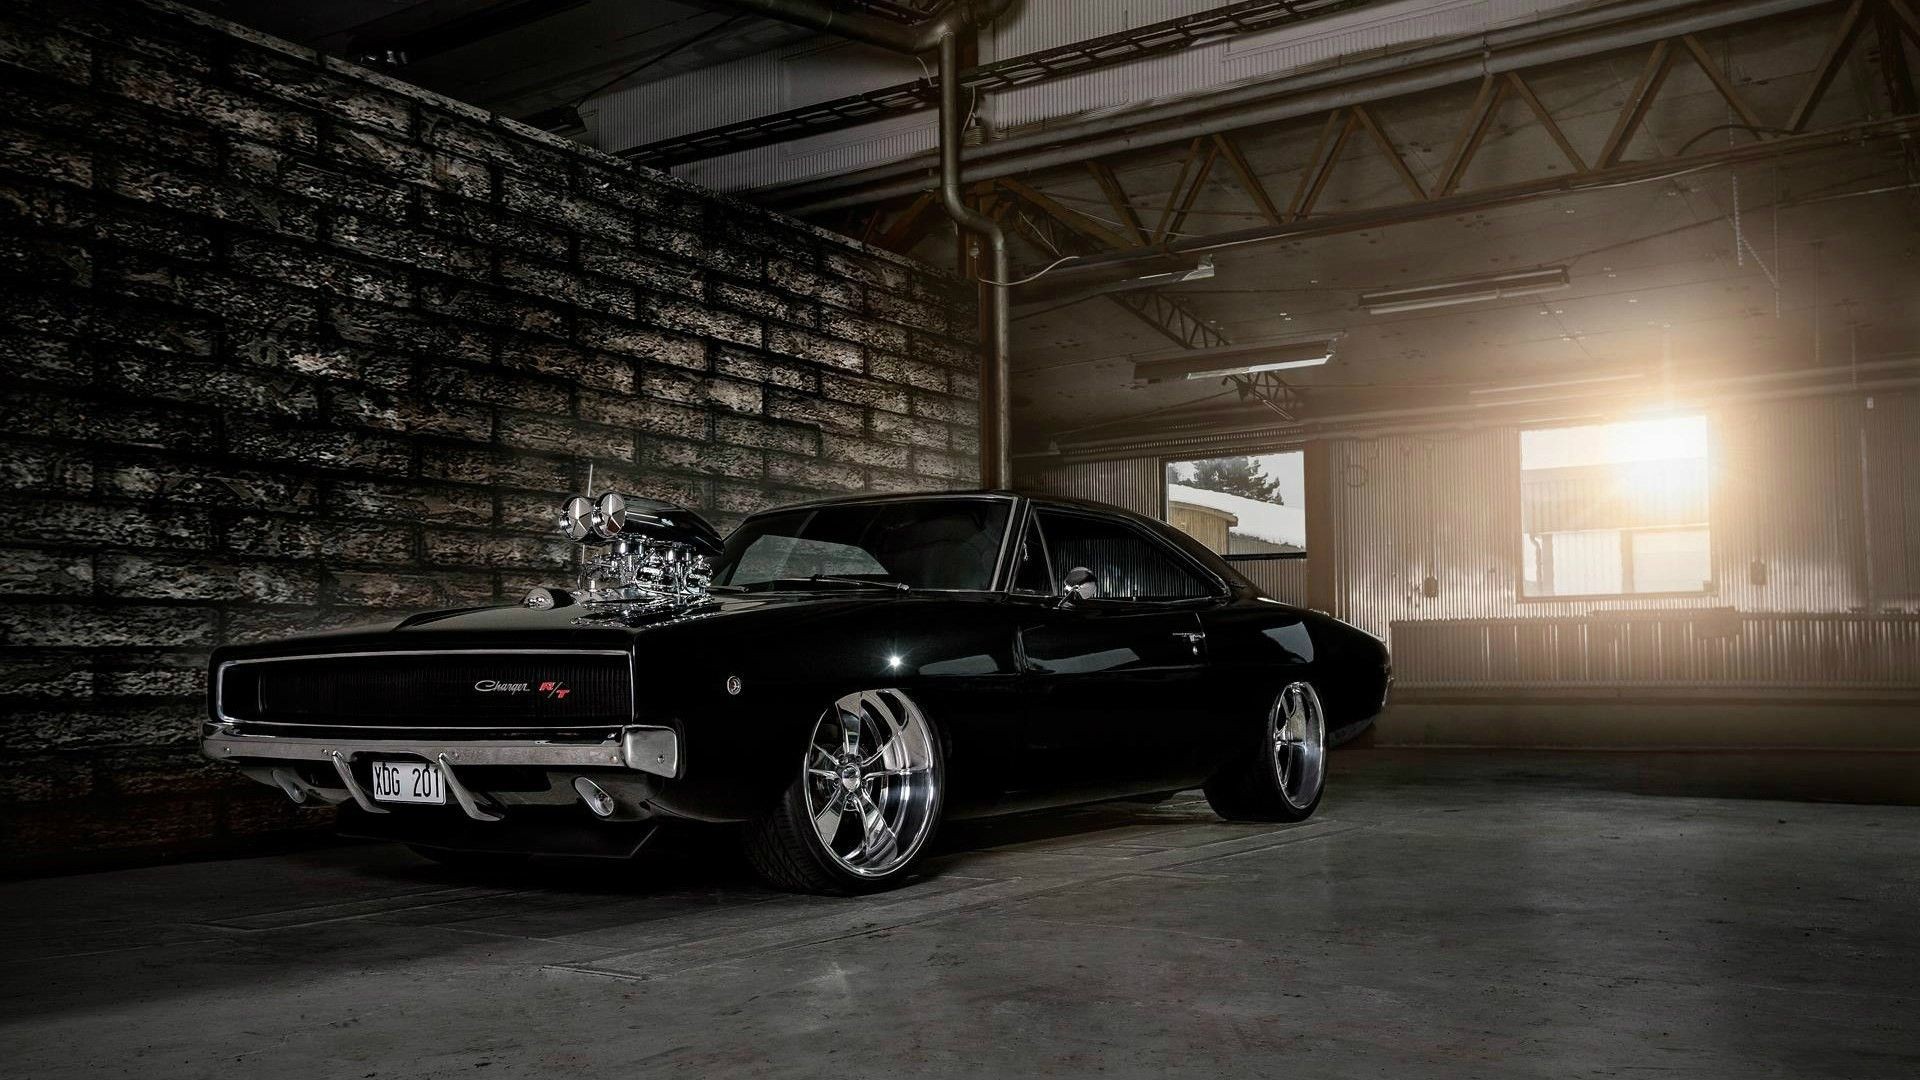 Dodge Charger HD Wallpaper Cool Image Amazing Apple